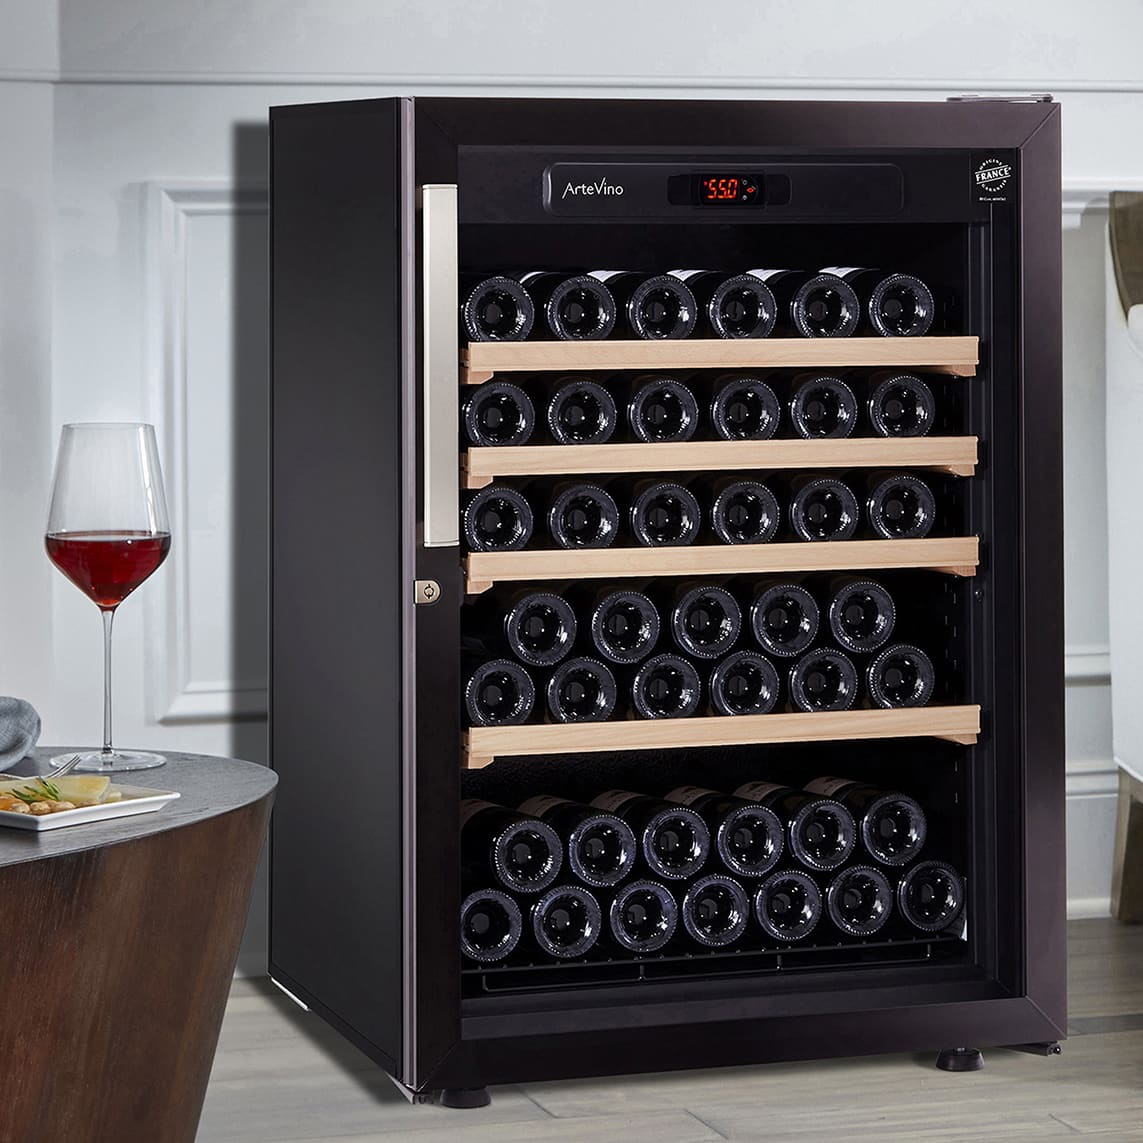 Wine Chiller - Keep It Cool